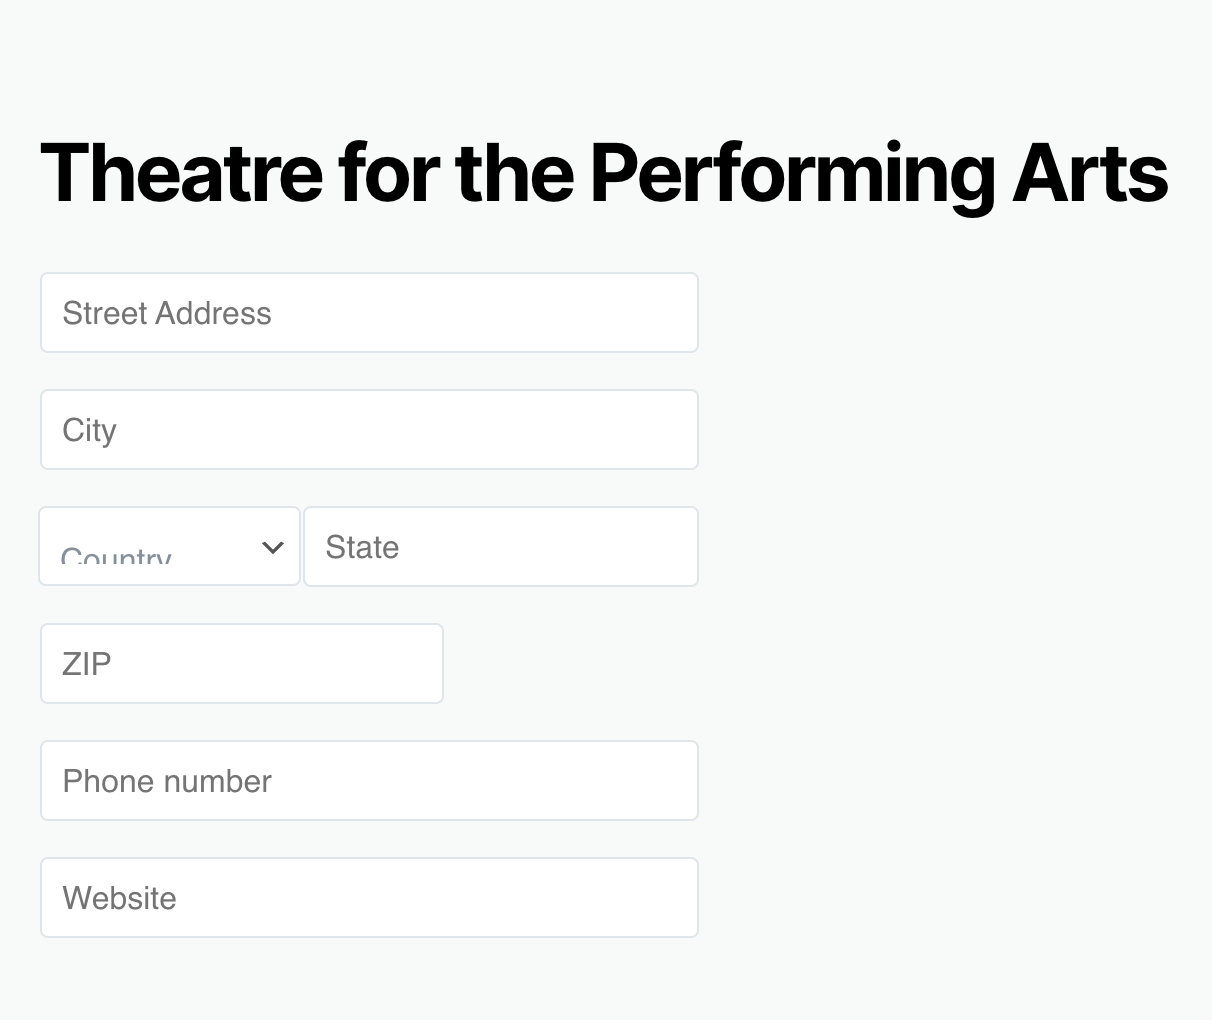 A theatre is being advertised with its street address, city, country, state, zip code, phone number, and website in the WordPress Block editor